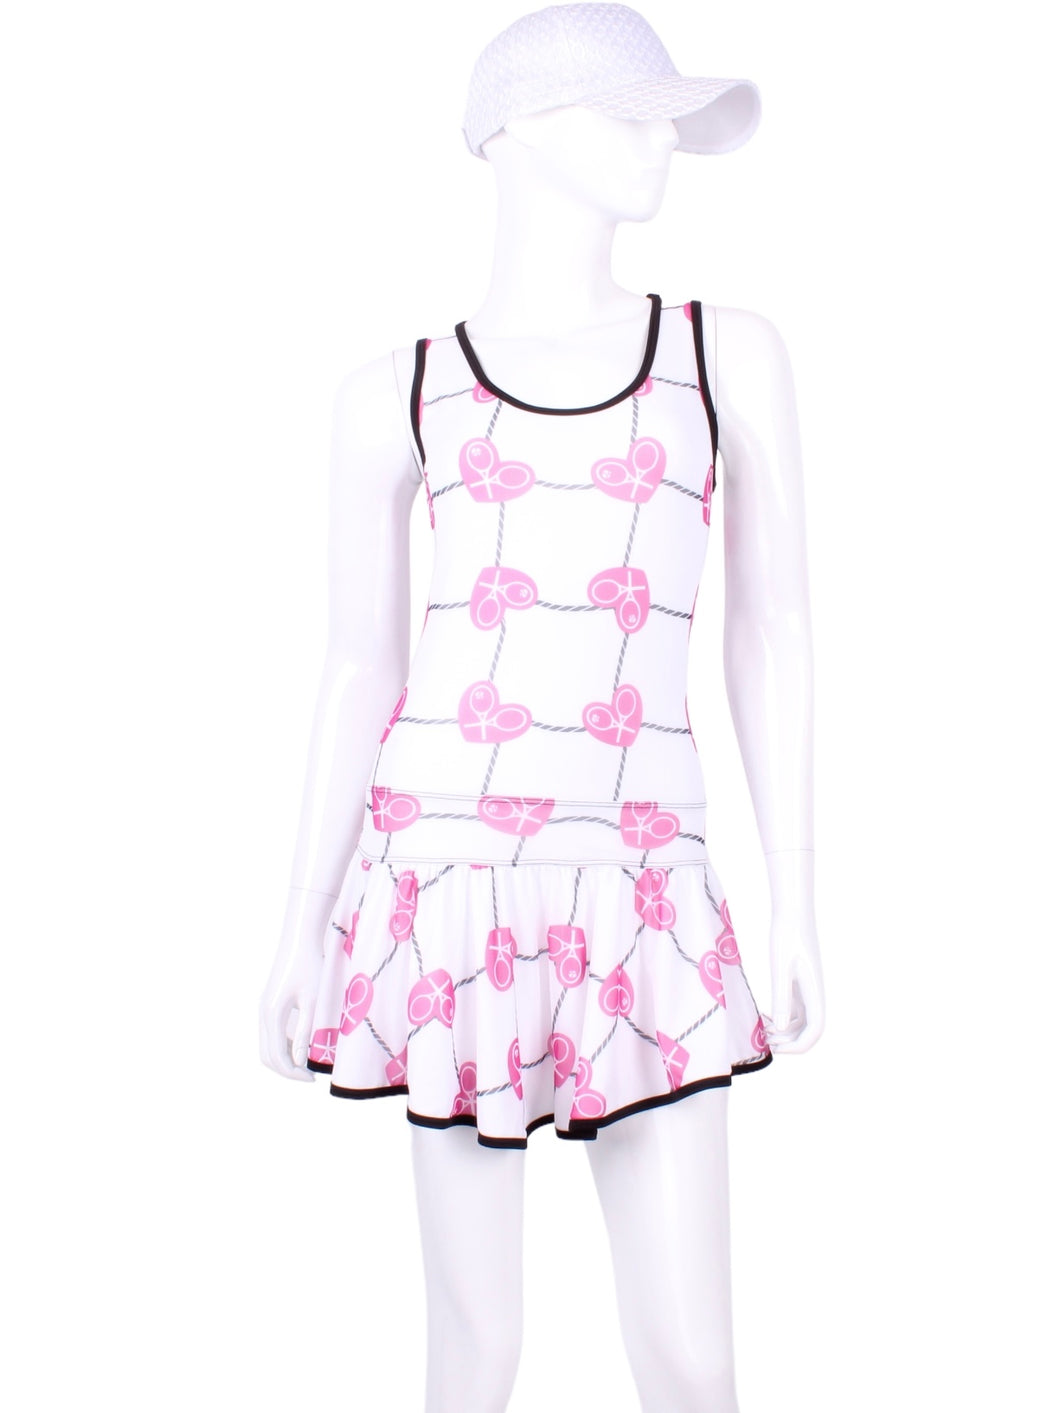 Limited Sandra Mee Court To Cocktails Tennis Dress Pink Hearts & Net